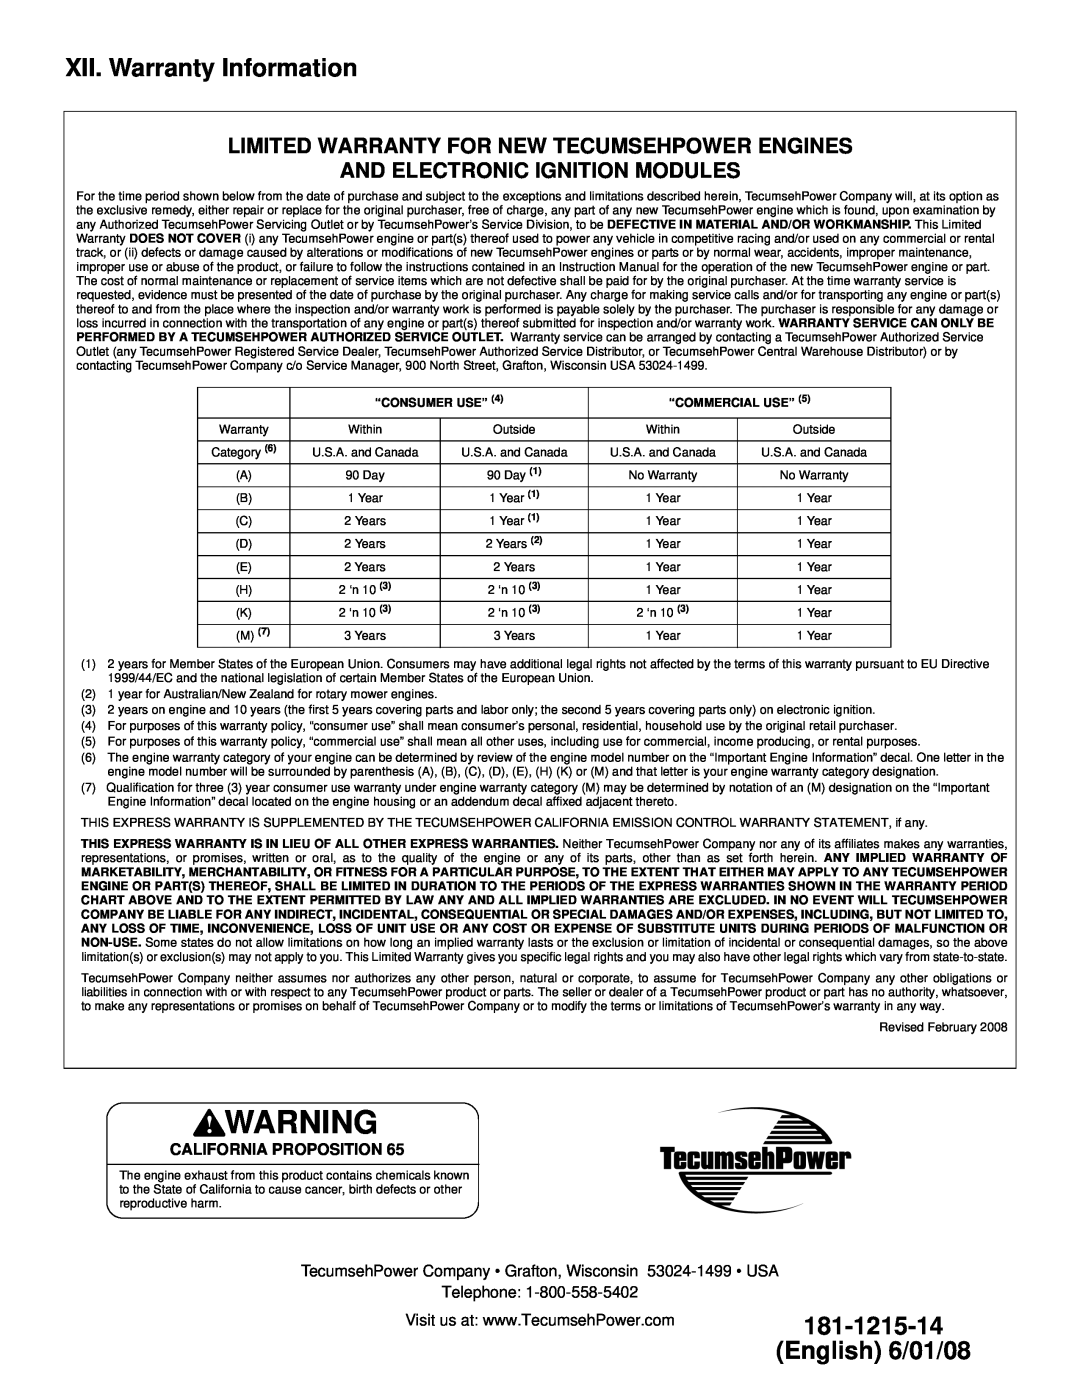 Tecumseh LV195EA XII. Warranty Information, Limited Warranty For New Tecumsehpower Engines, English 6/01/08, Telephone 